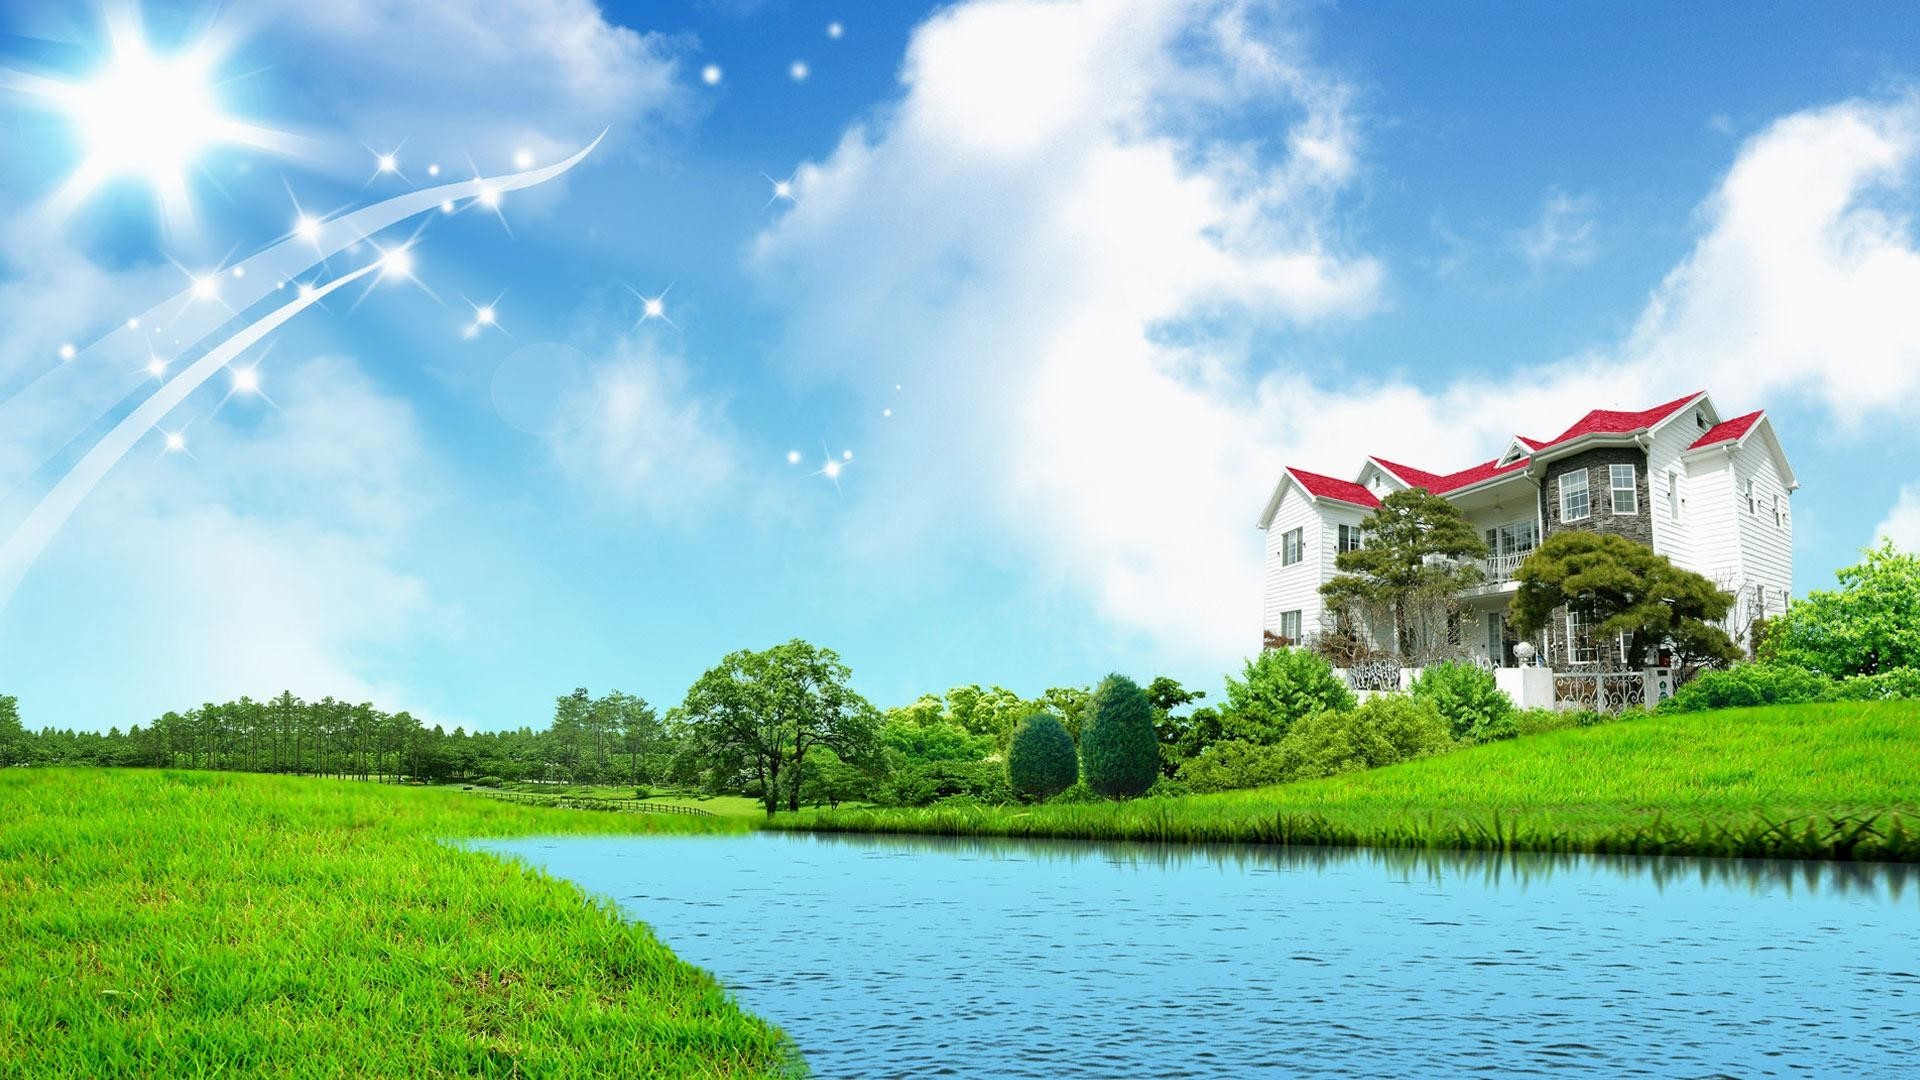 1920x1080  wallpaper.wiki-Sweet-home-fantasy-green-nature-wallpapers